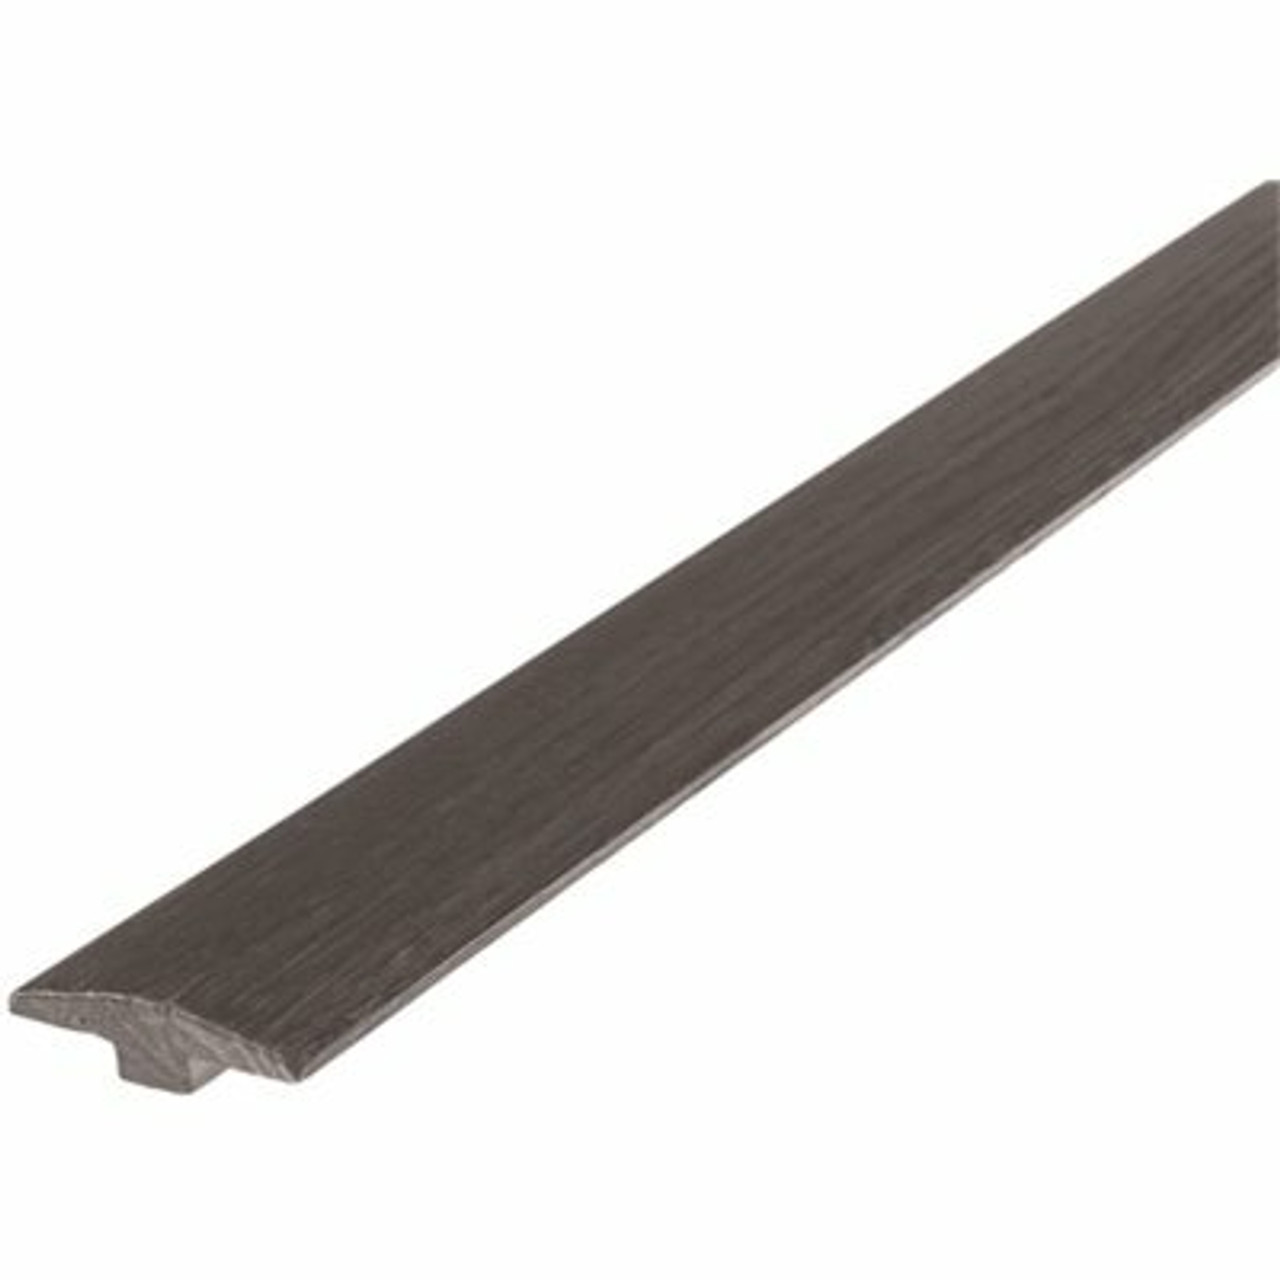 Shaw Bountiful Sienna 7/32 In. Thick X 1-1/2 In. Wide X 94 In. Length Vinyl T-Mold Mpr Molding